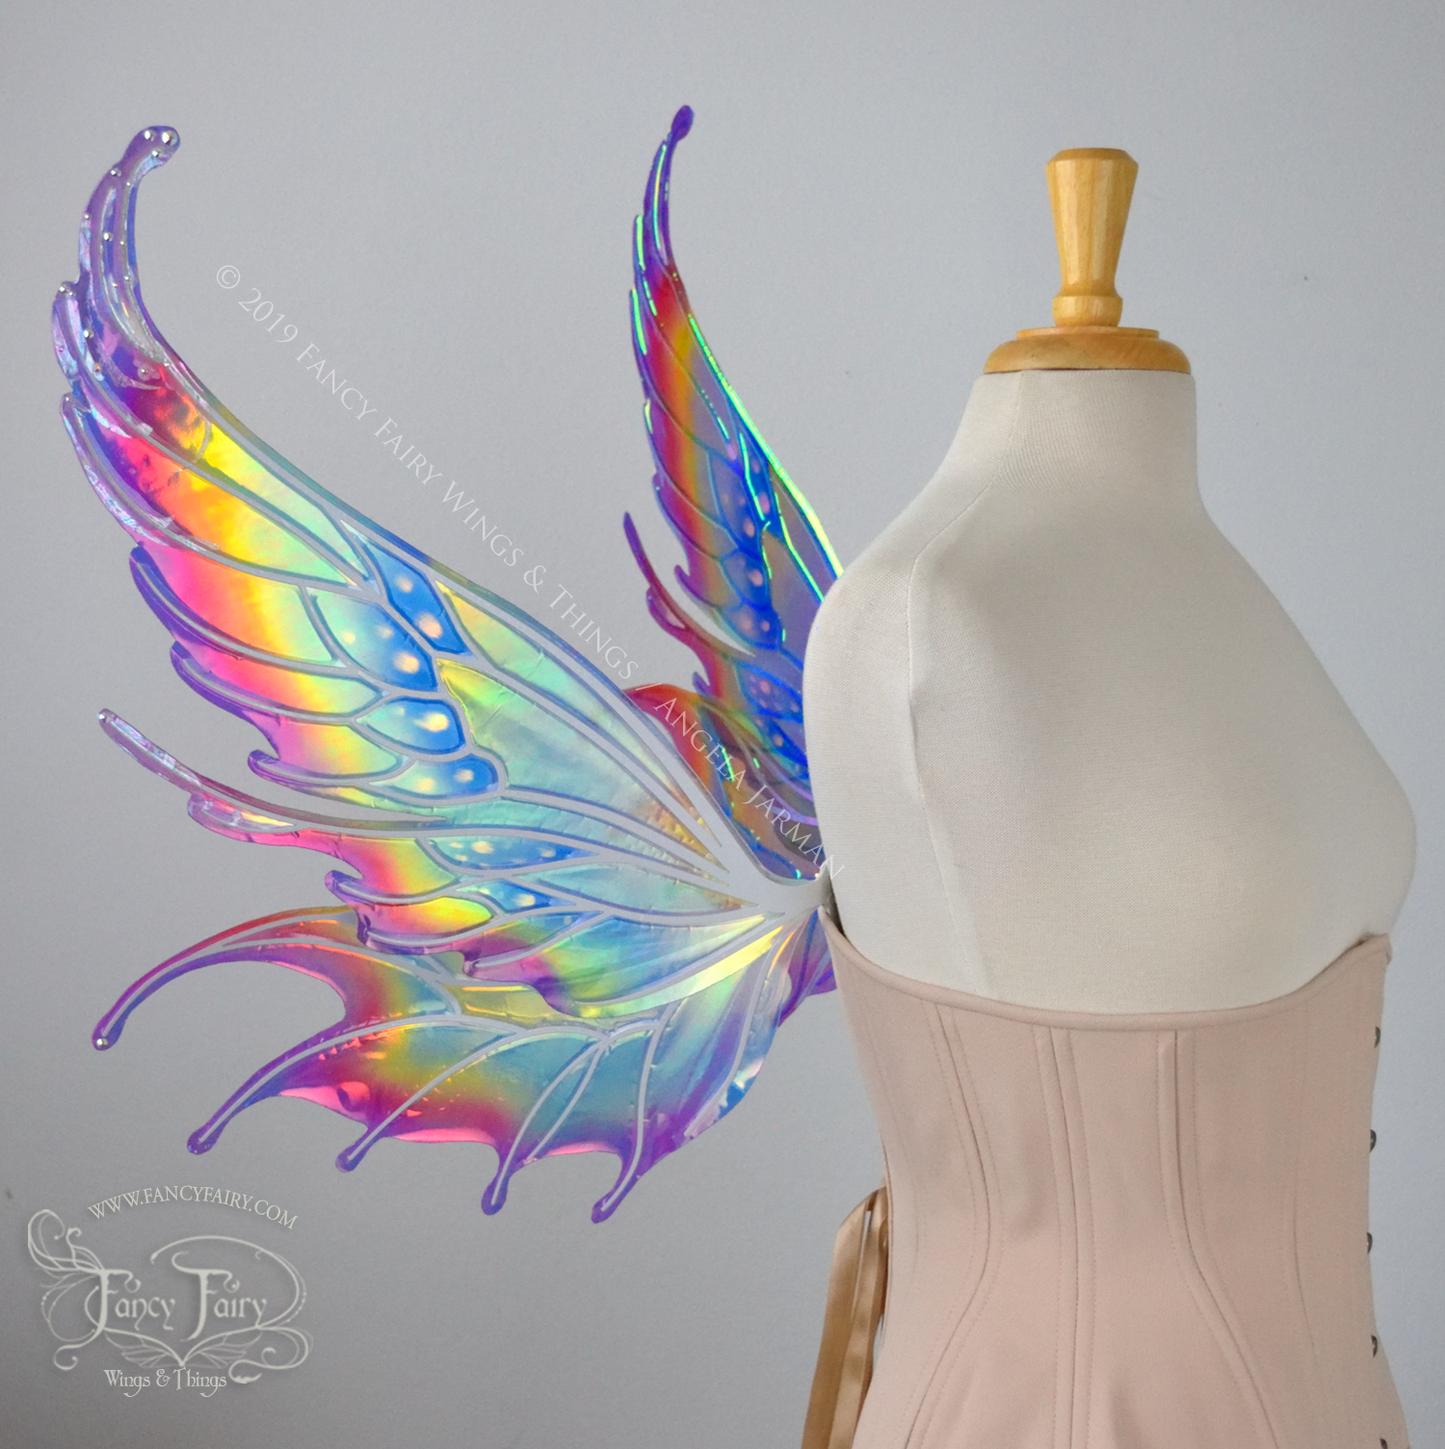 Aquatica Rainbow Iridescent Convertible Fairy Wings with Opal Foil & Swarovski Crystals